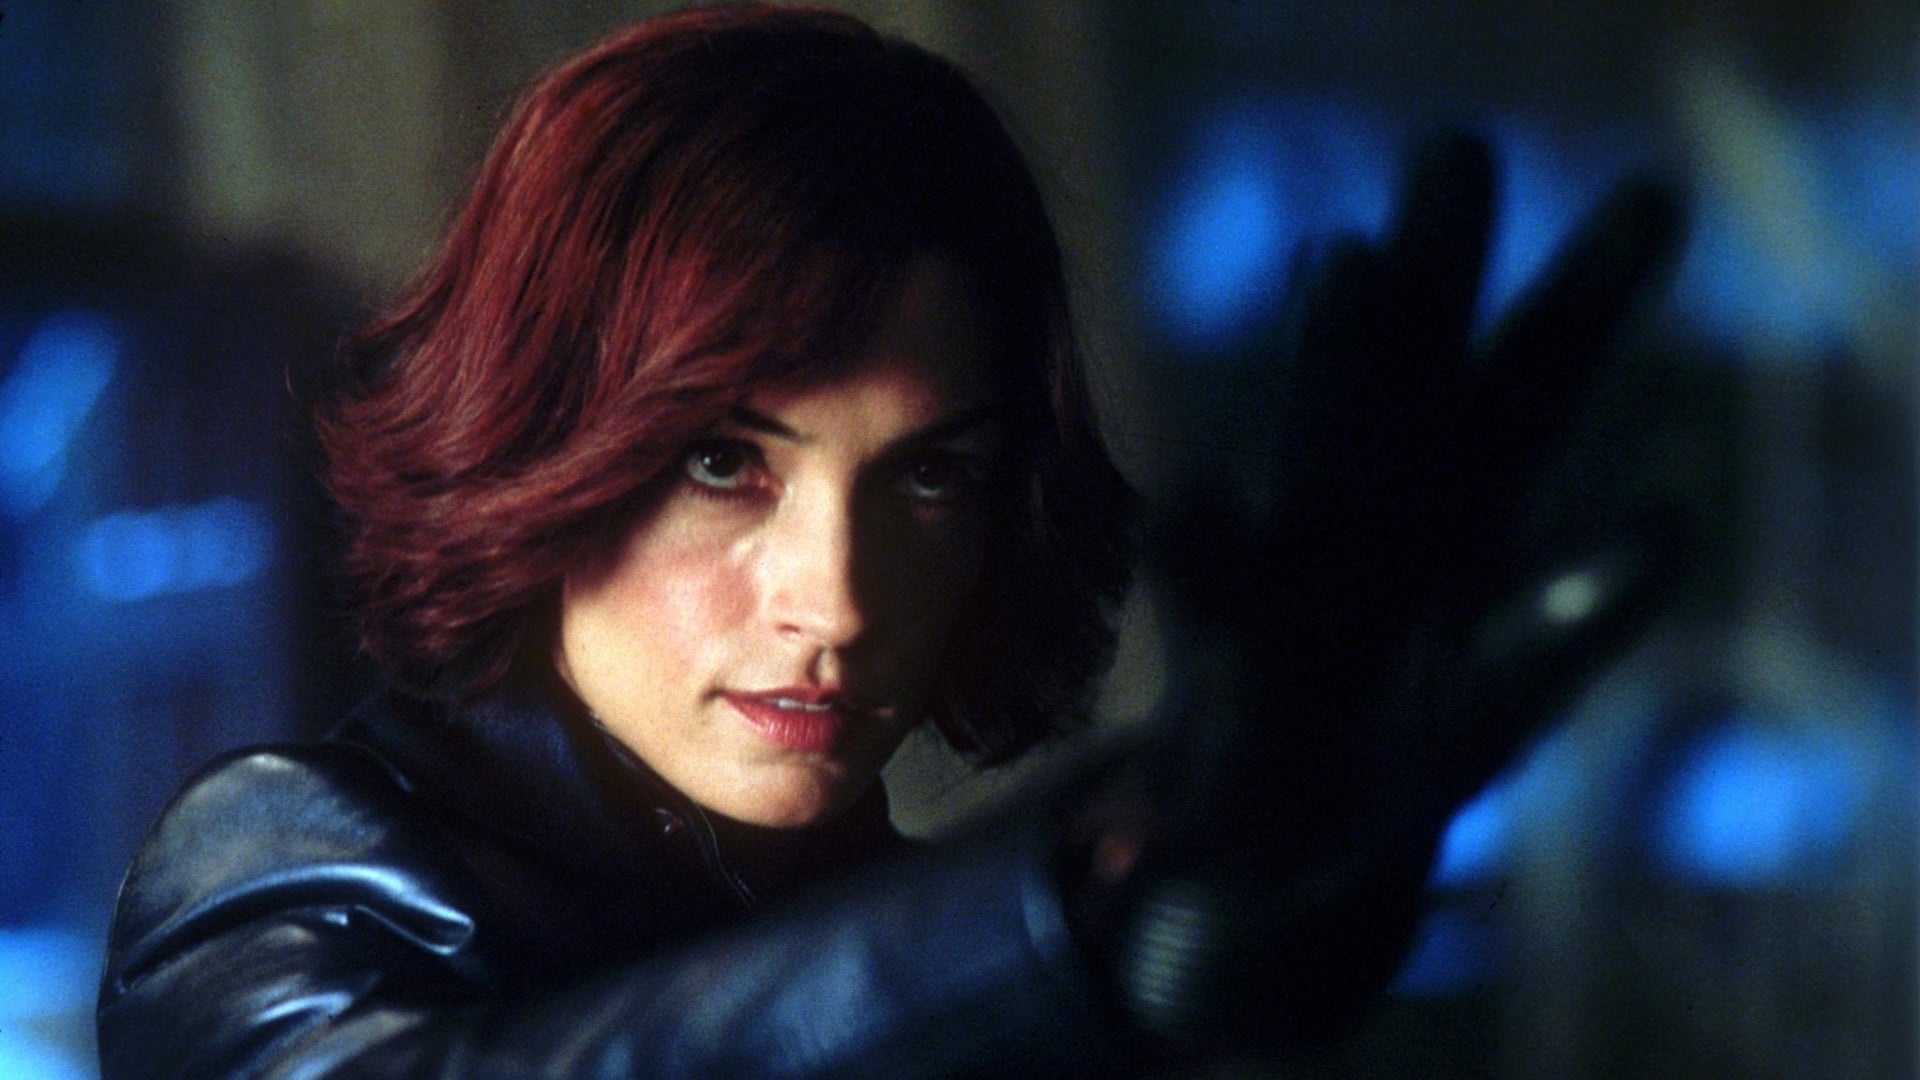 X2 (Movie): Jean Grey, An Omega-level mutant born with psionic powers. 1920x1080 Full HD Wallpaper.